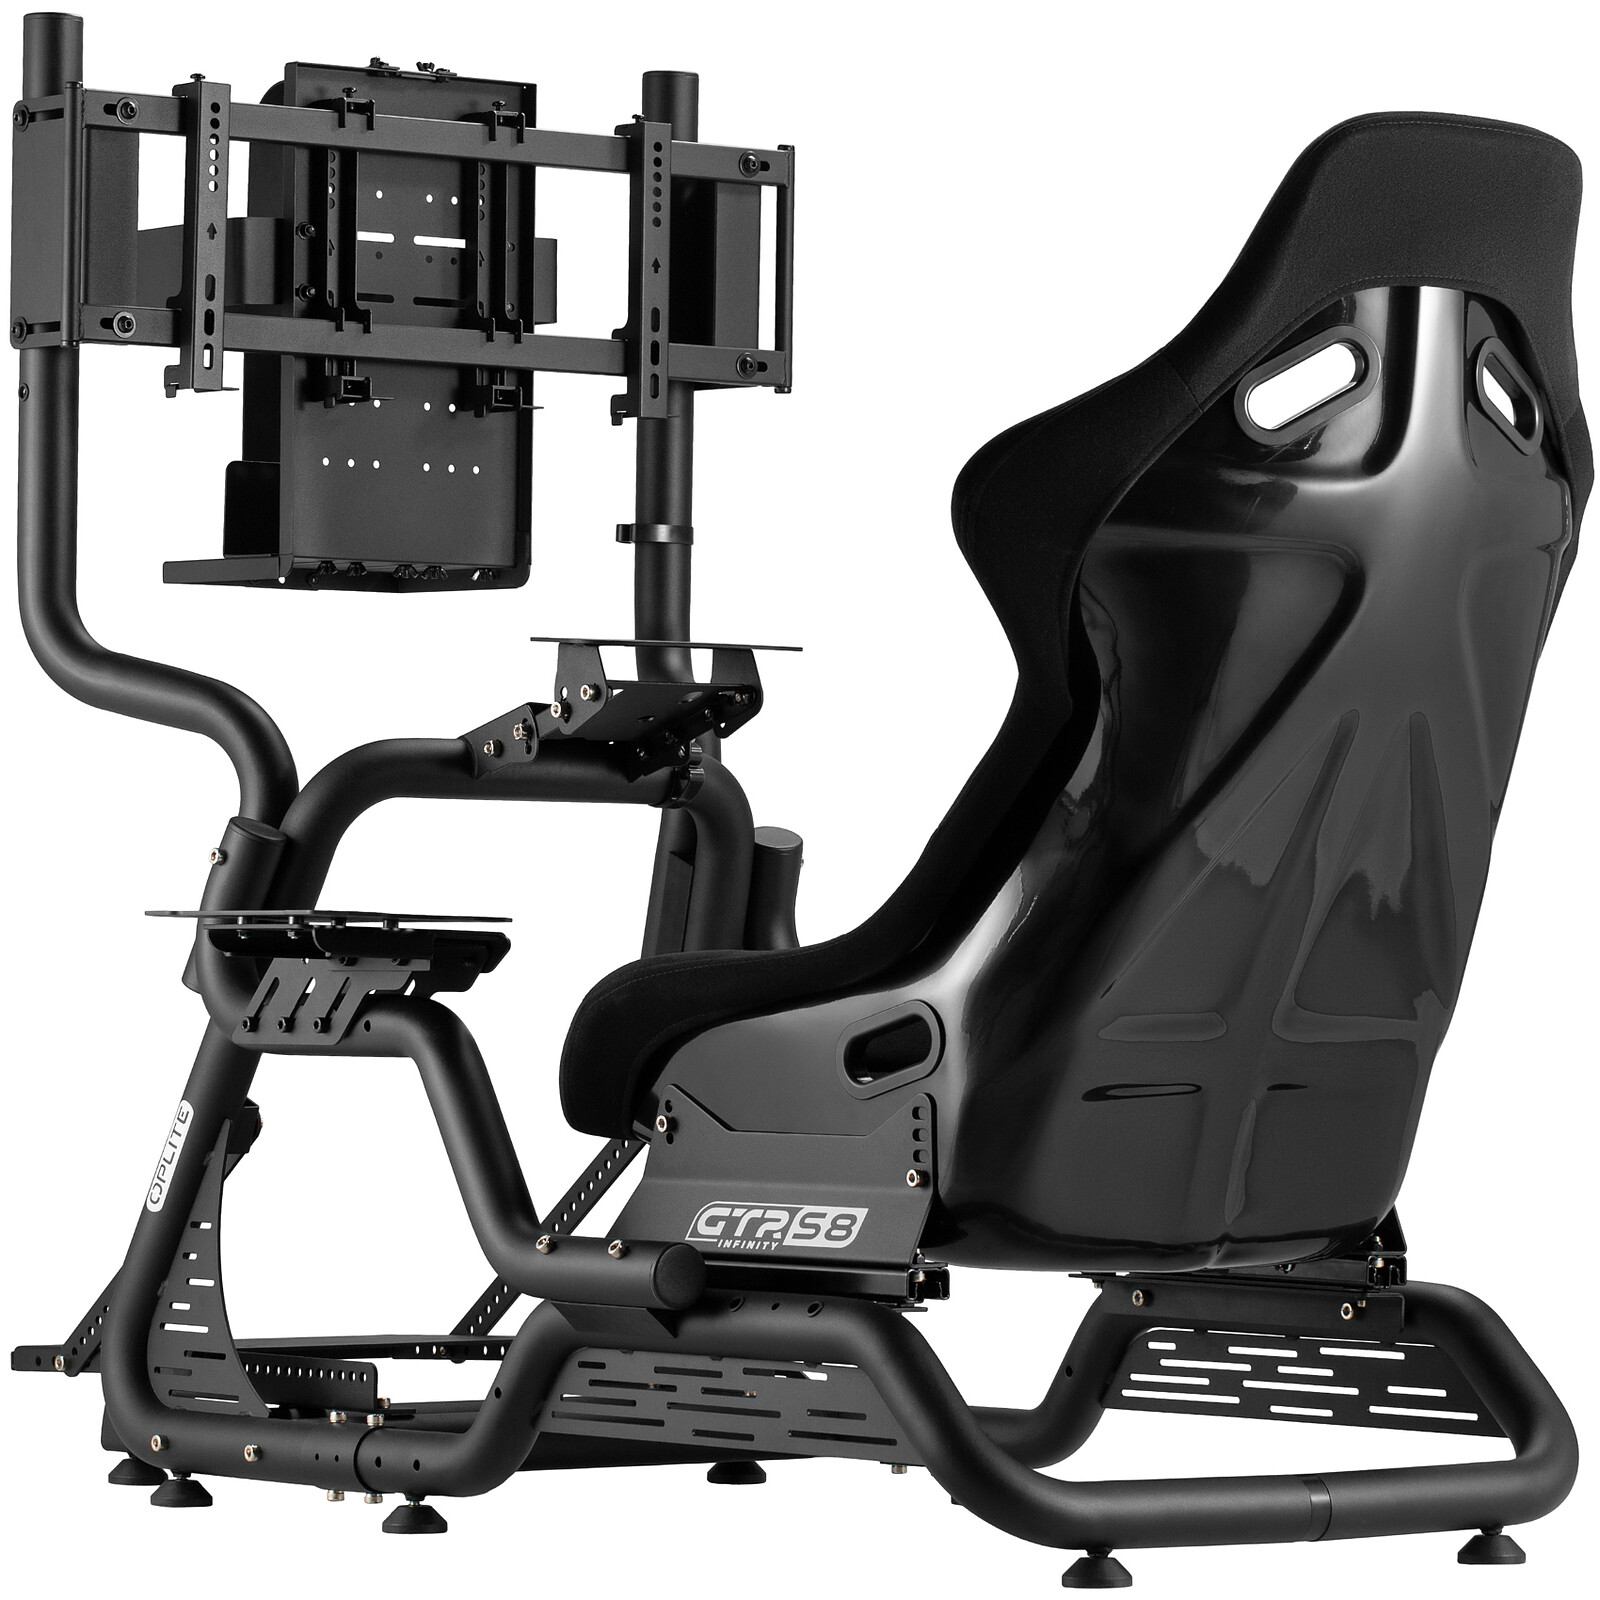 OPLITE Cockpit GTR S8 Infinity Force - Other gaming accessories